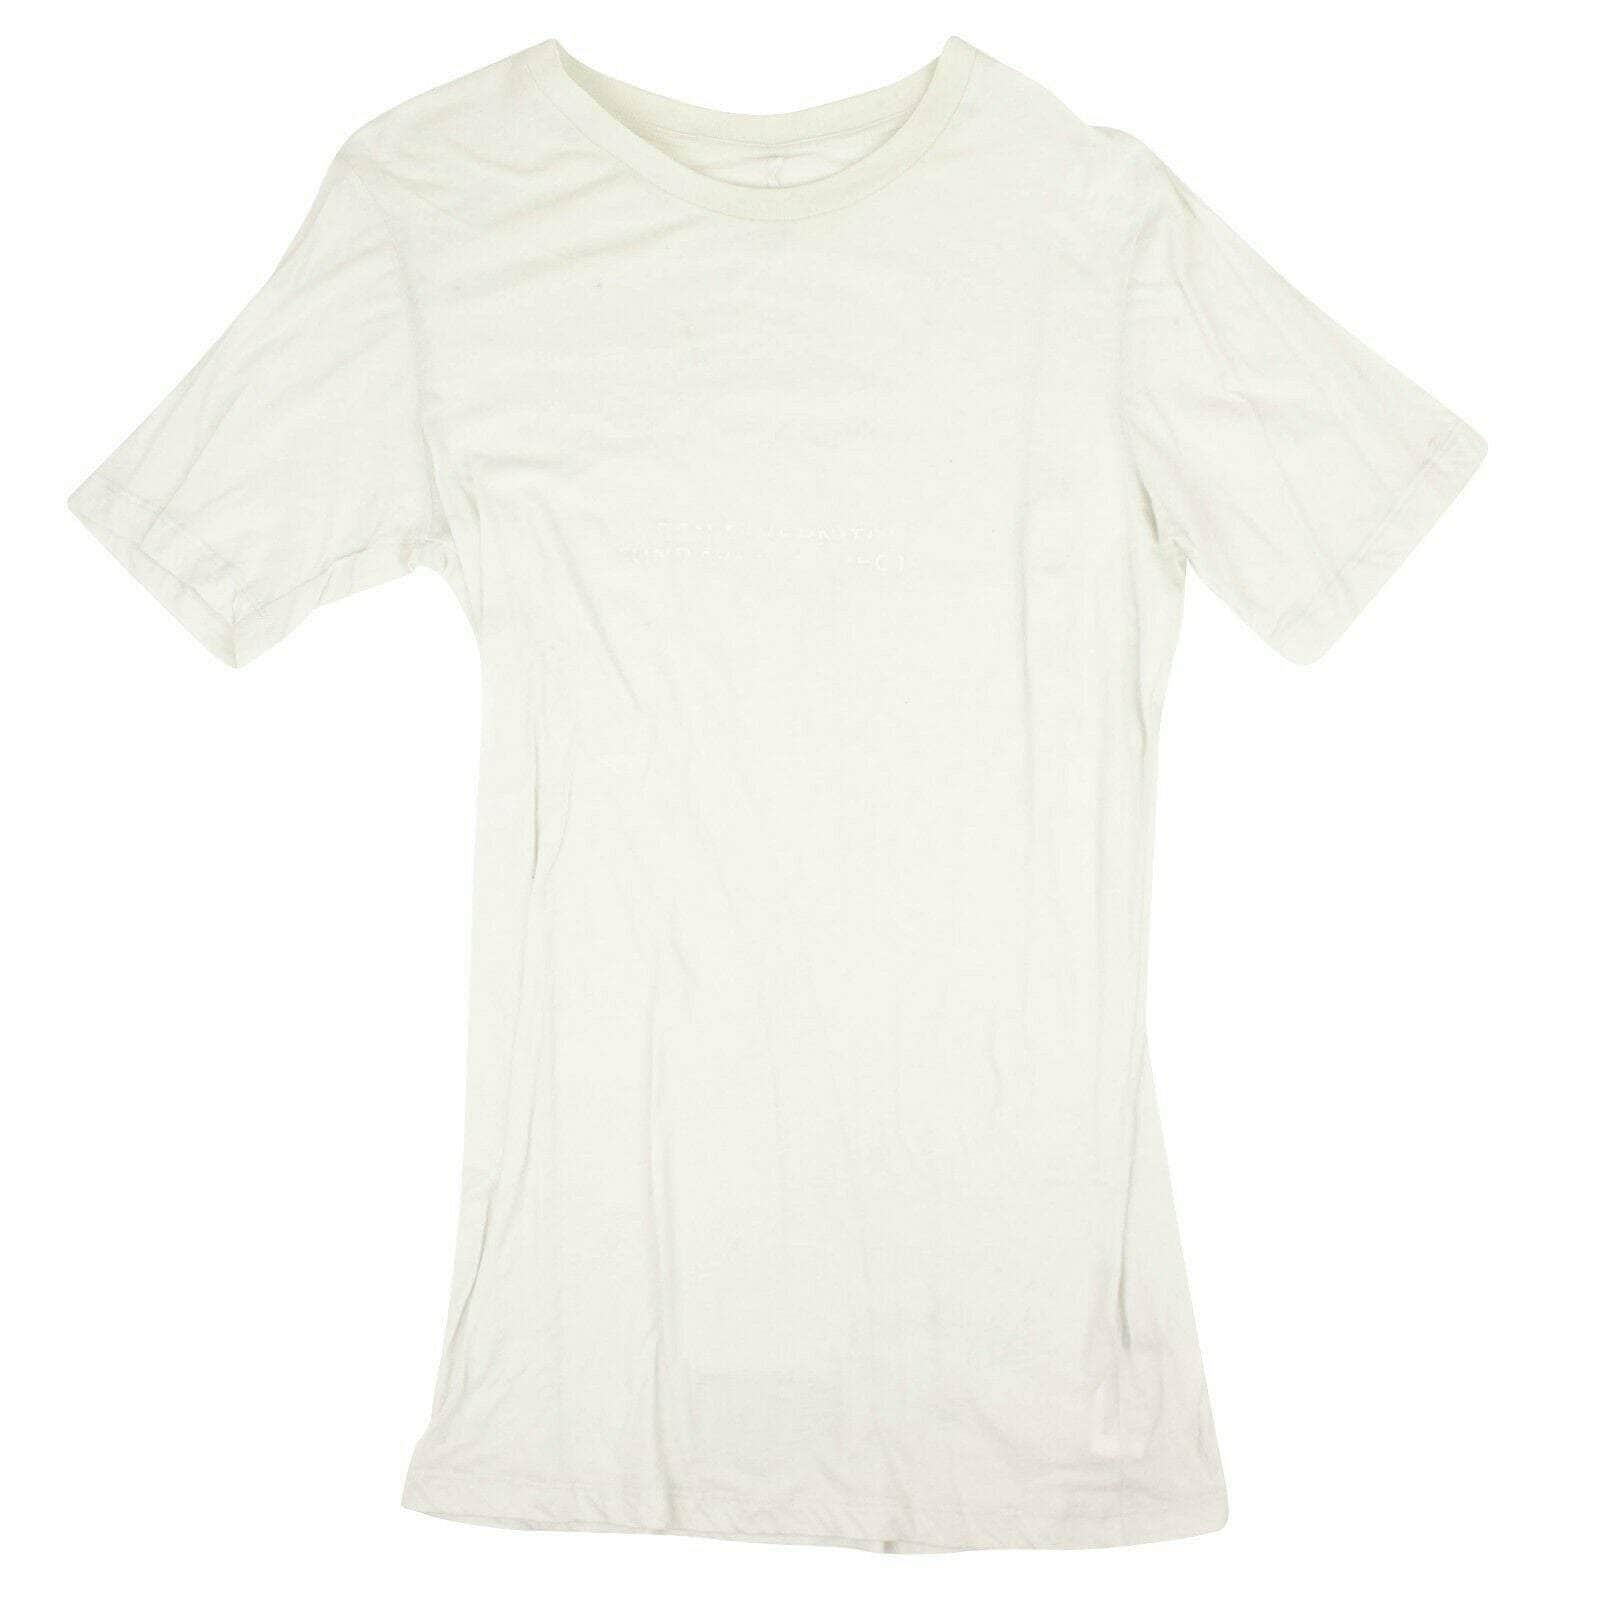 UNRAVEL PROJECT channelenable-all, couponcollection, gender-mens, main-clothing, size-l, size-m, size-s, under-250, unravel-project Light Gray Short Sleeve Elongated T-Shirt